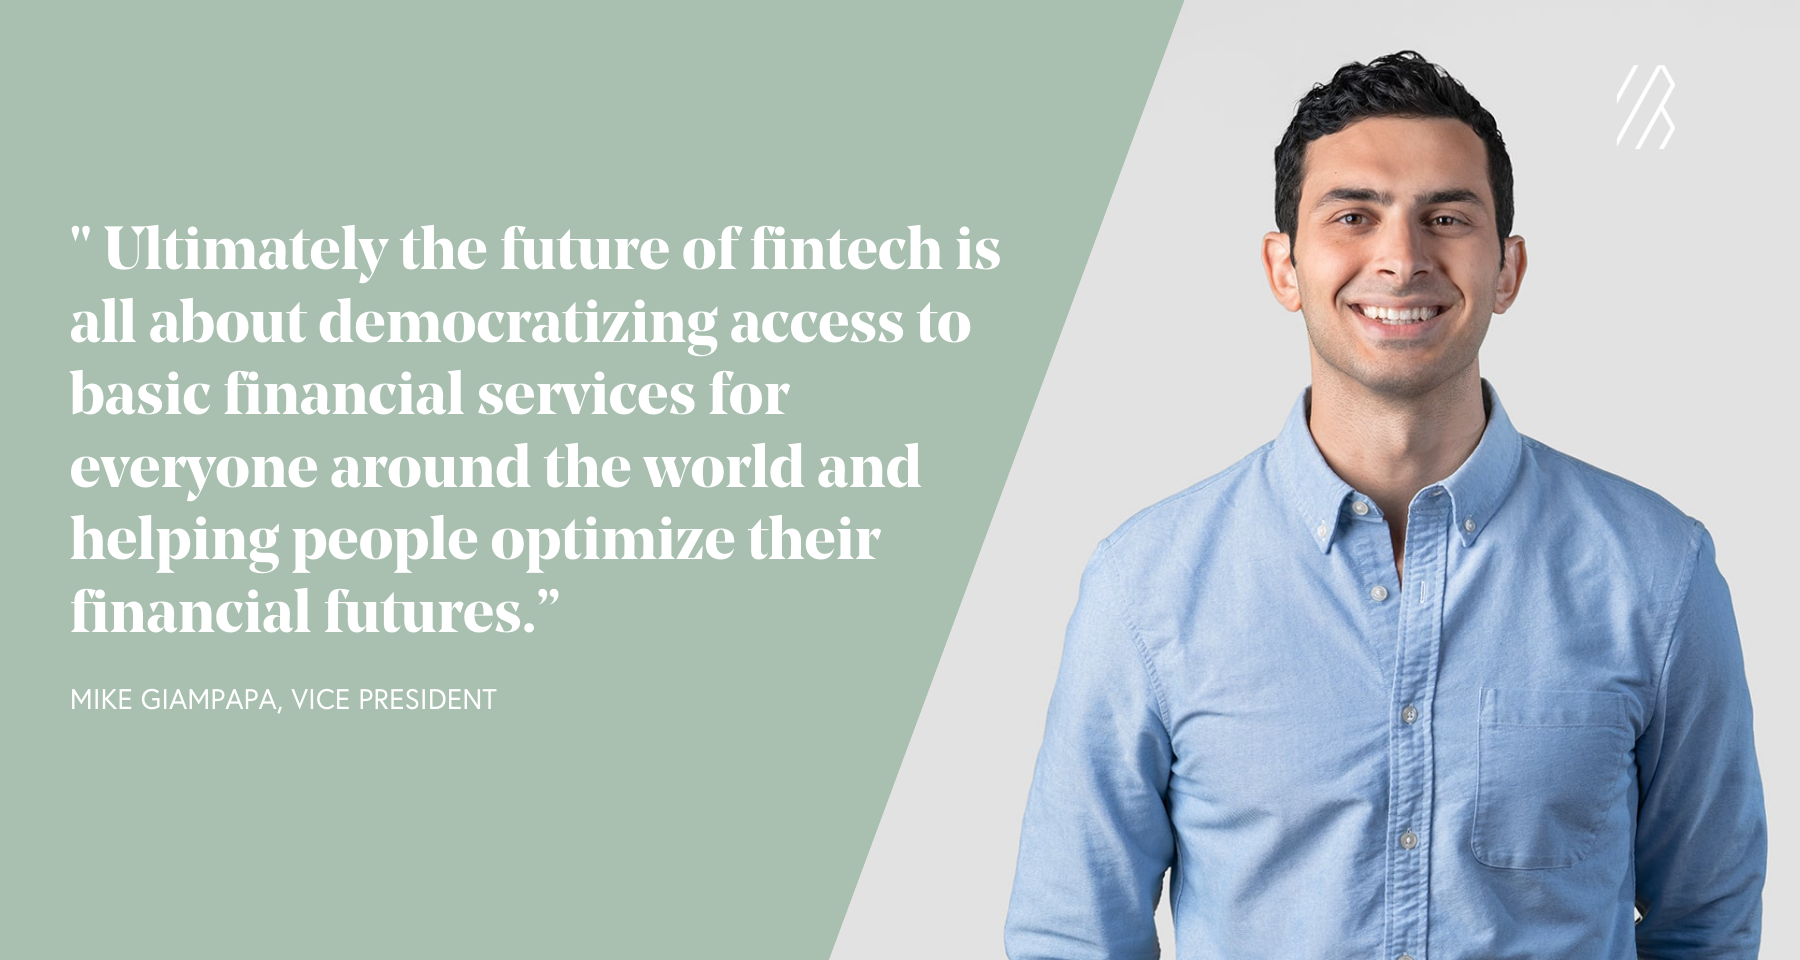 Photo of man in blue shirt with a text pullout quote about the future of fintech 